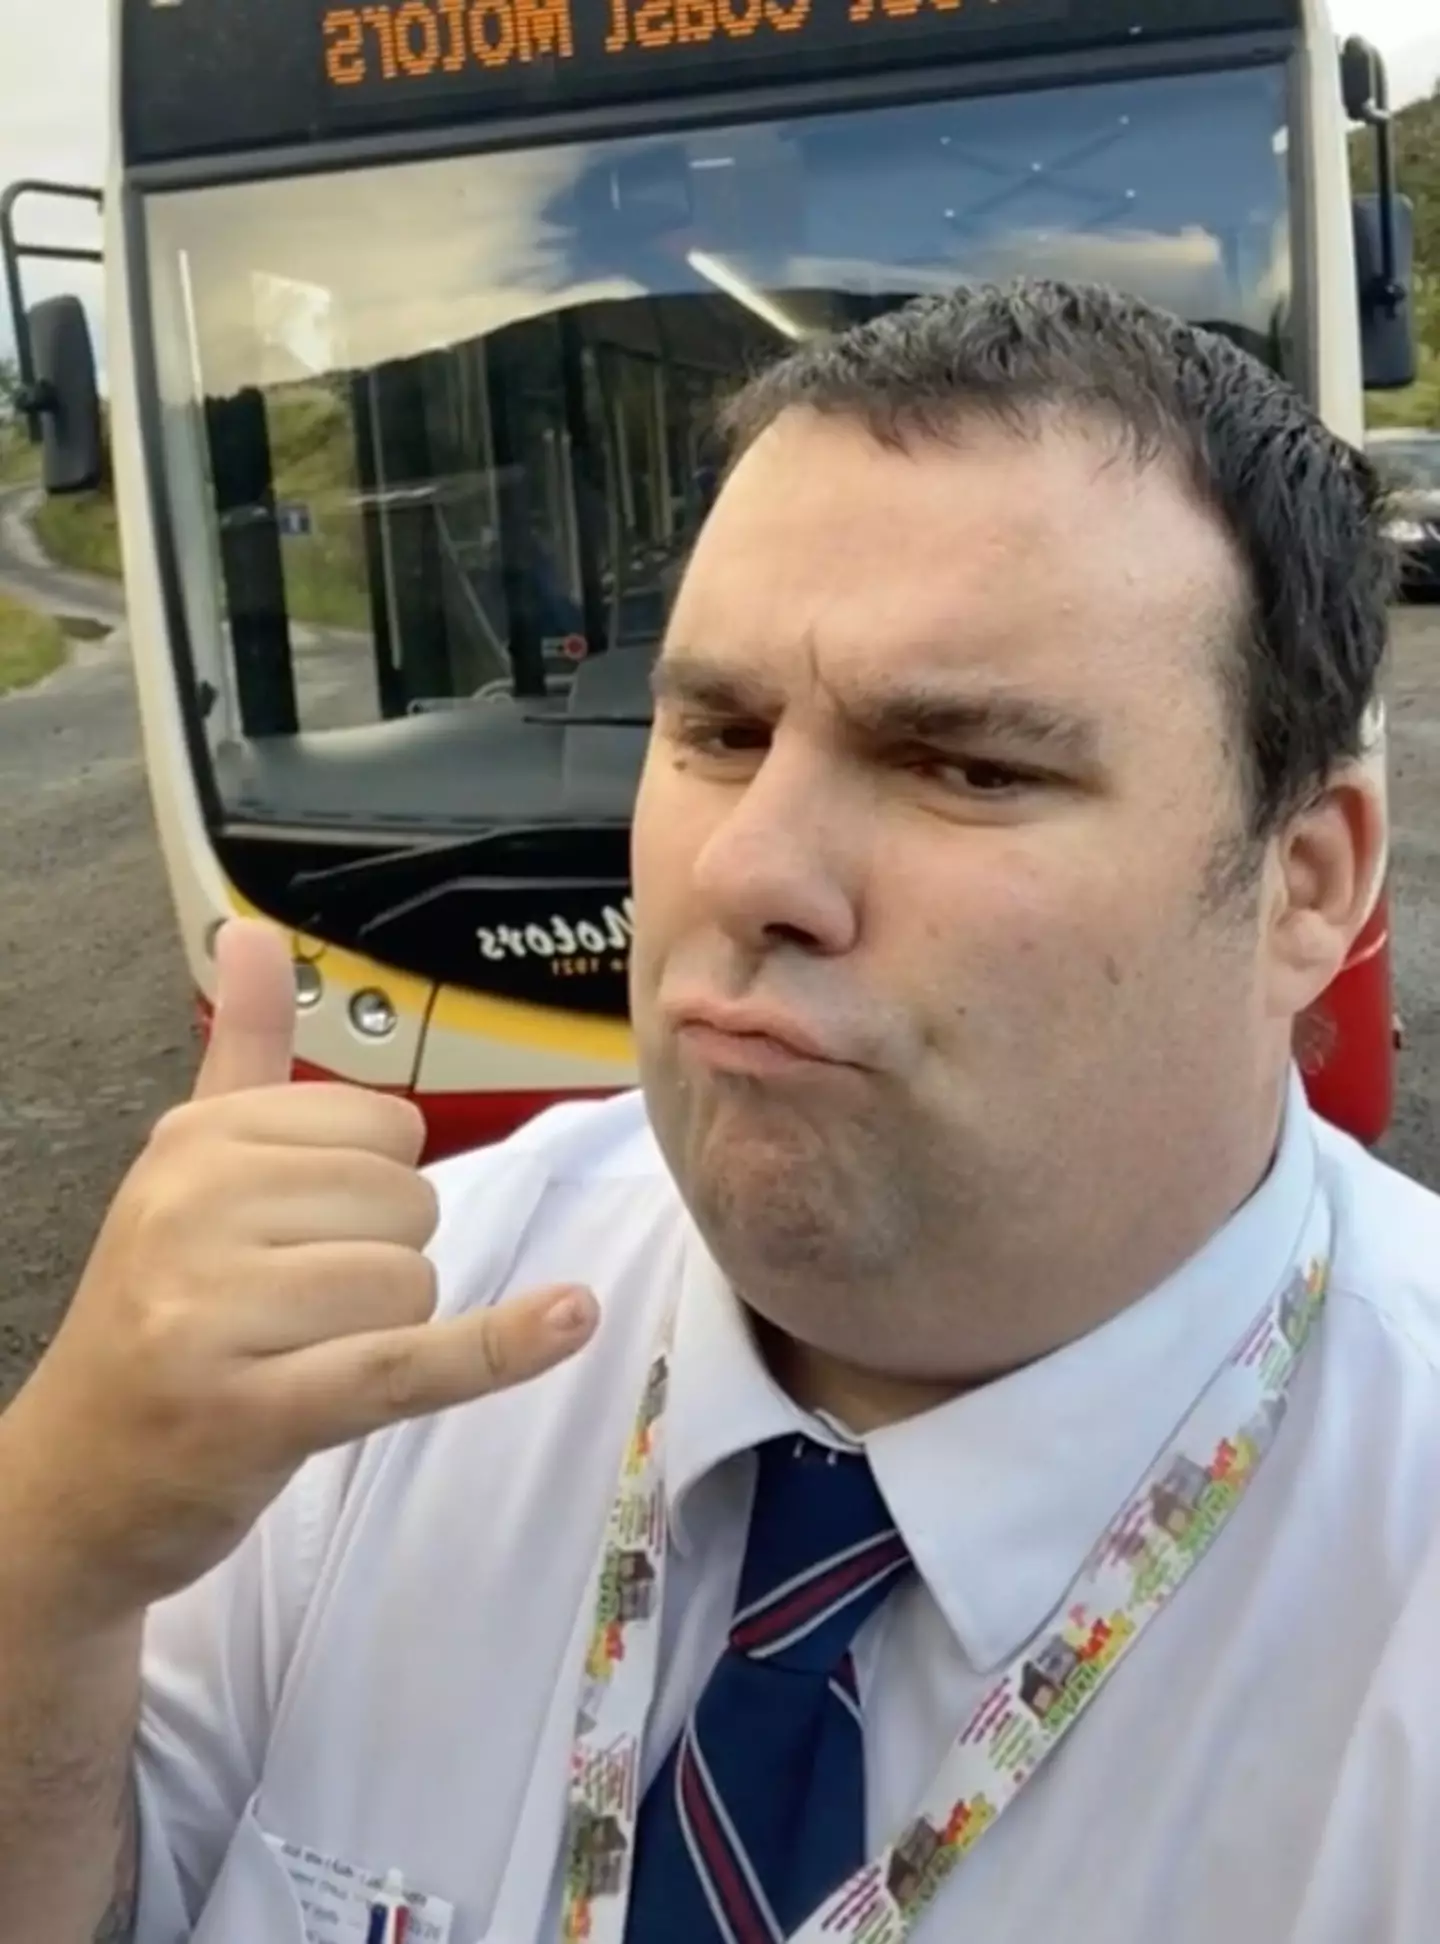 Stephen works as a bus driver in Glasgow.